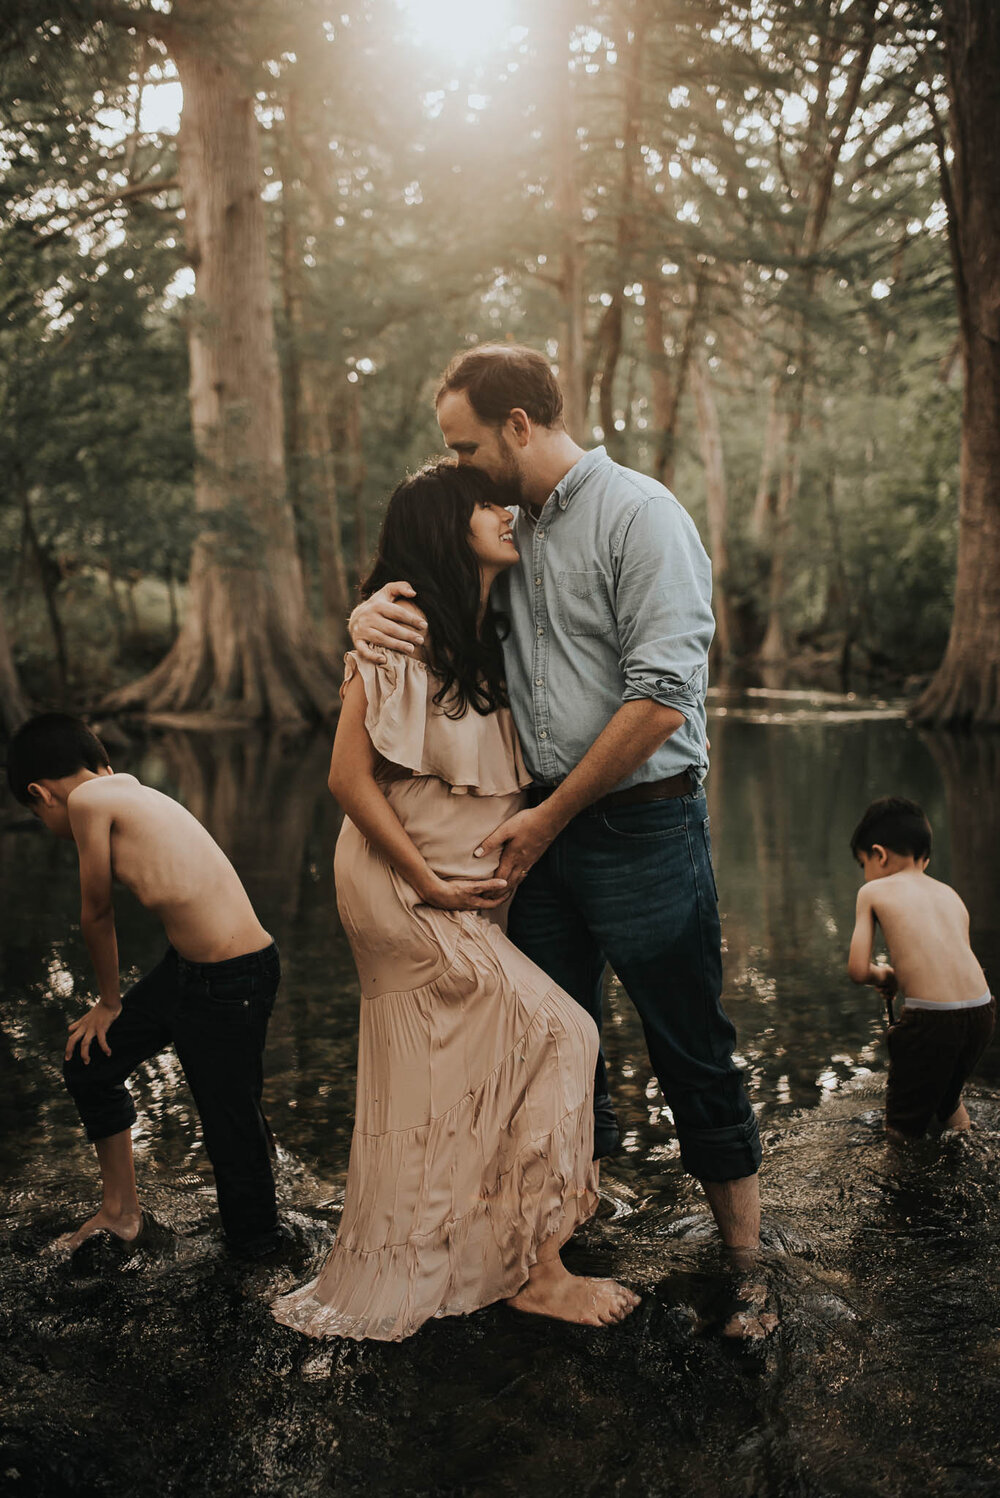  Lifestyle Maternity/Family Session at Cibilo Nature Center, Boerne, Texas. 